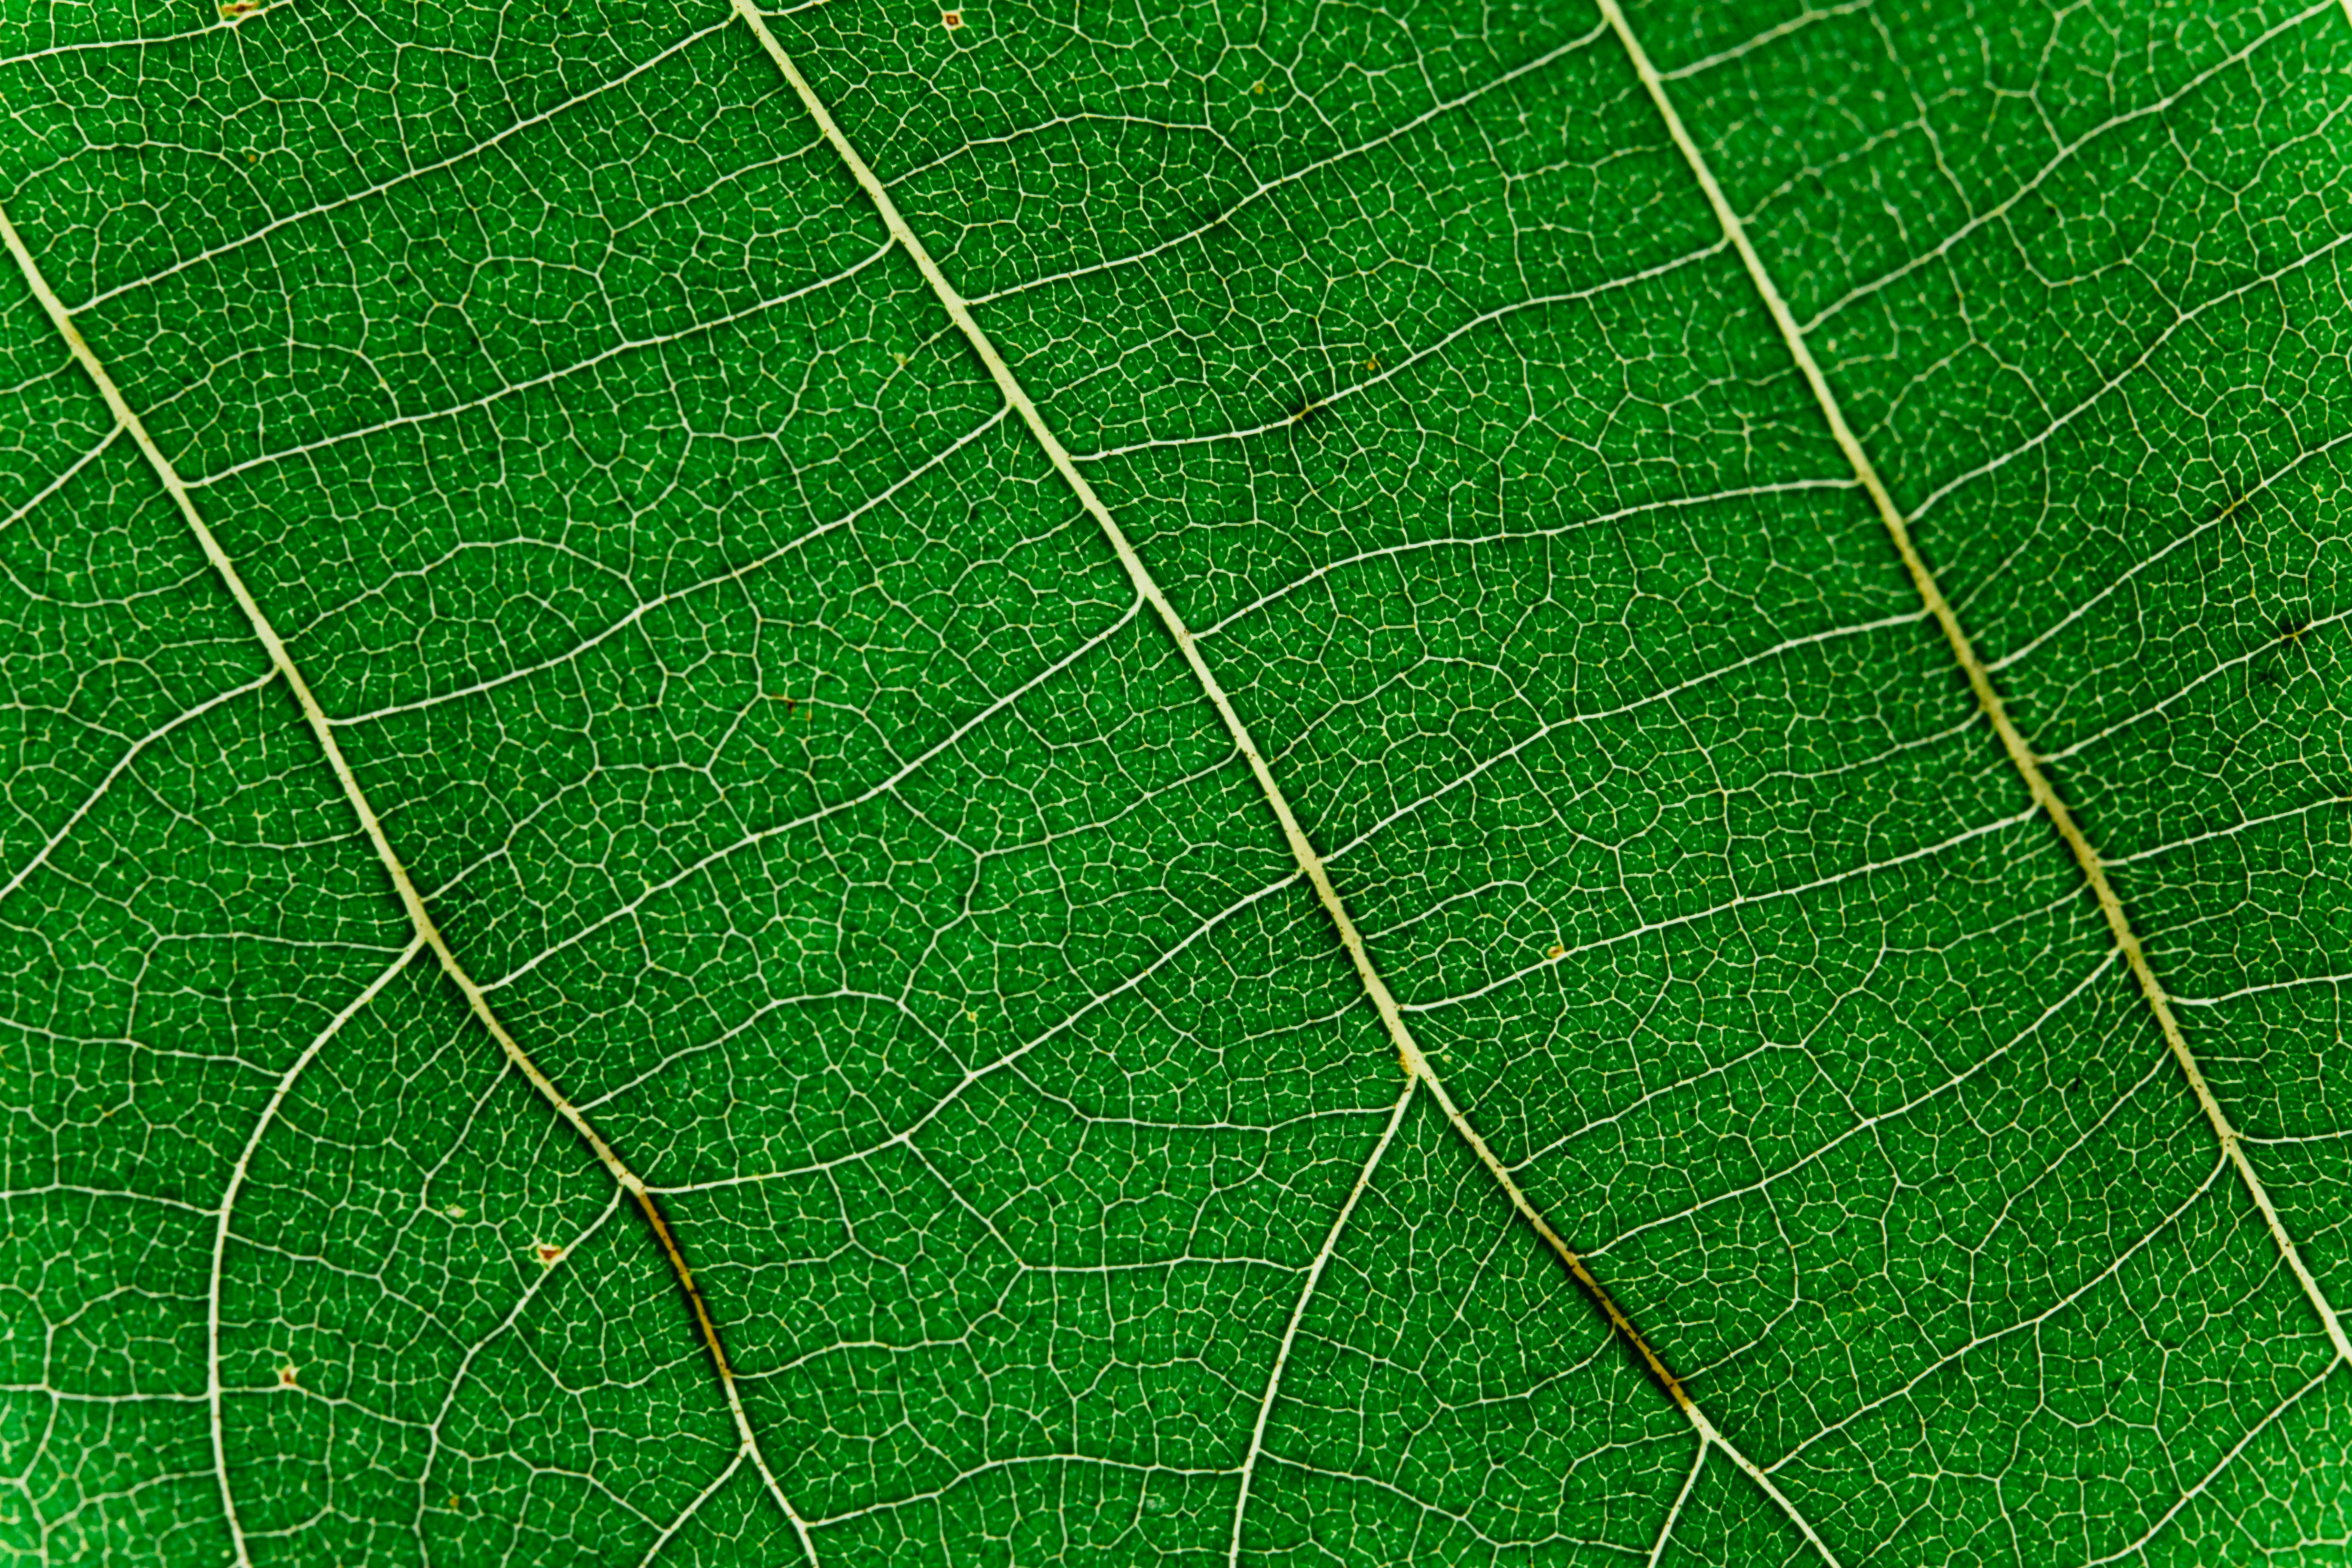 Green Flat Oblong Leaf Plant on Close Up Photography · Free Stock Photo